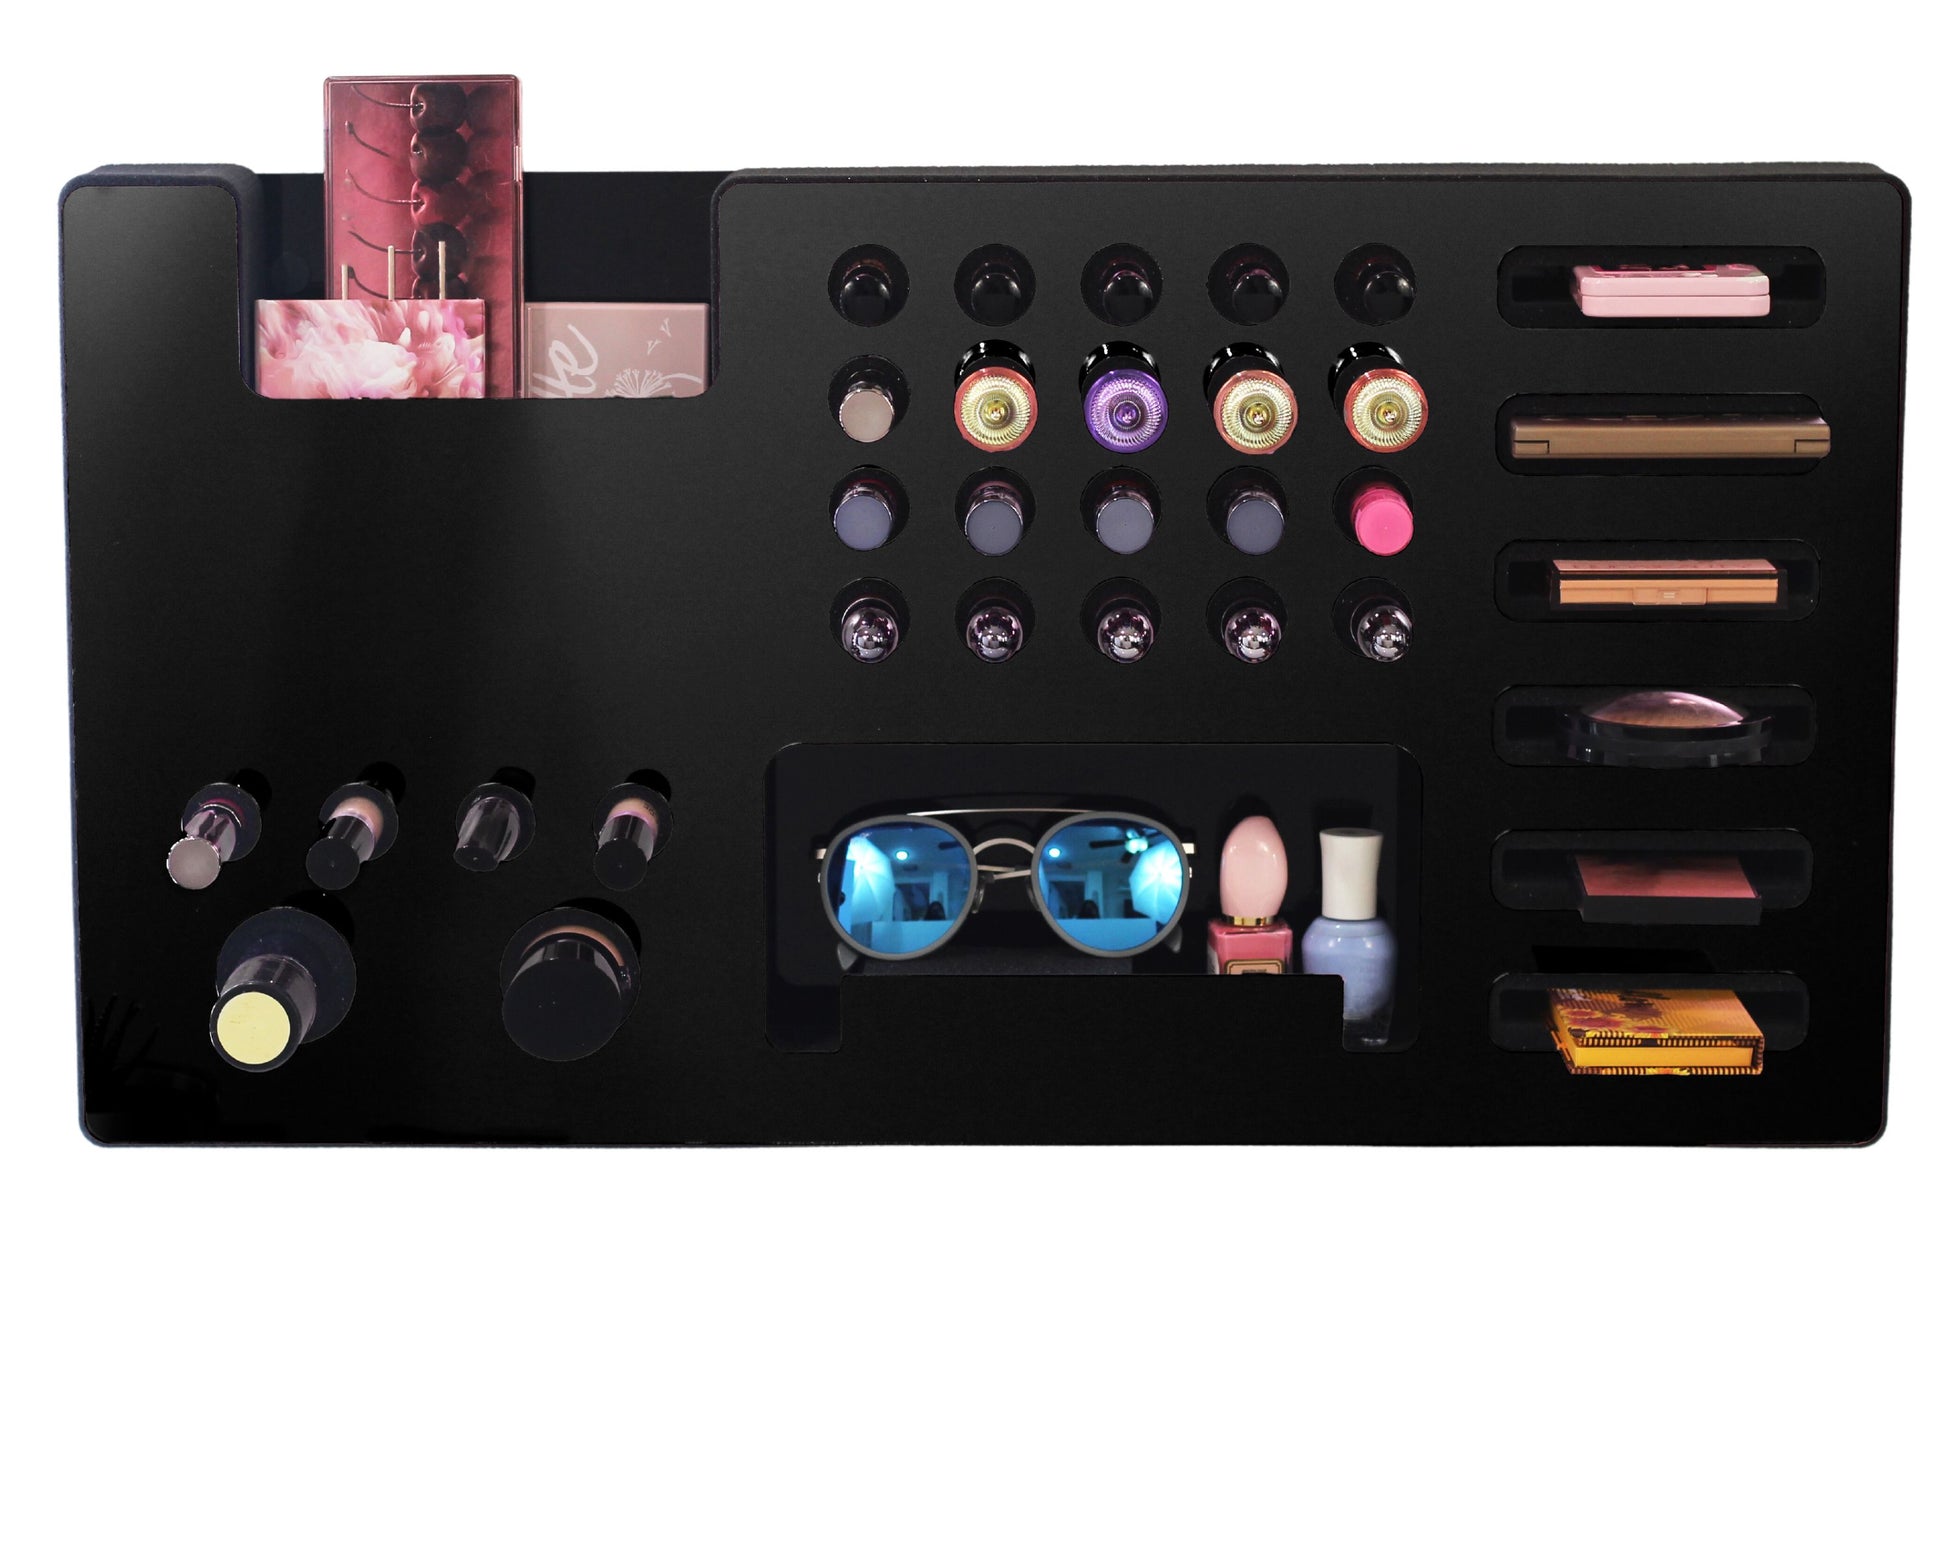 Black Ultra Complete Makeup Solution Organizer shown mounted on the wall holding lipsticks, lip glosses, nail polishes, brushes, sunglasses and more by keeping items accessible and off of the counter. Shown next to a makeup vanity with samples of suggested items the organizer can hold. Shown with a white background.